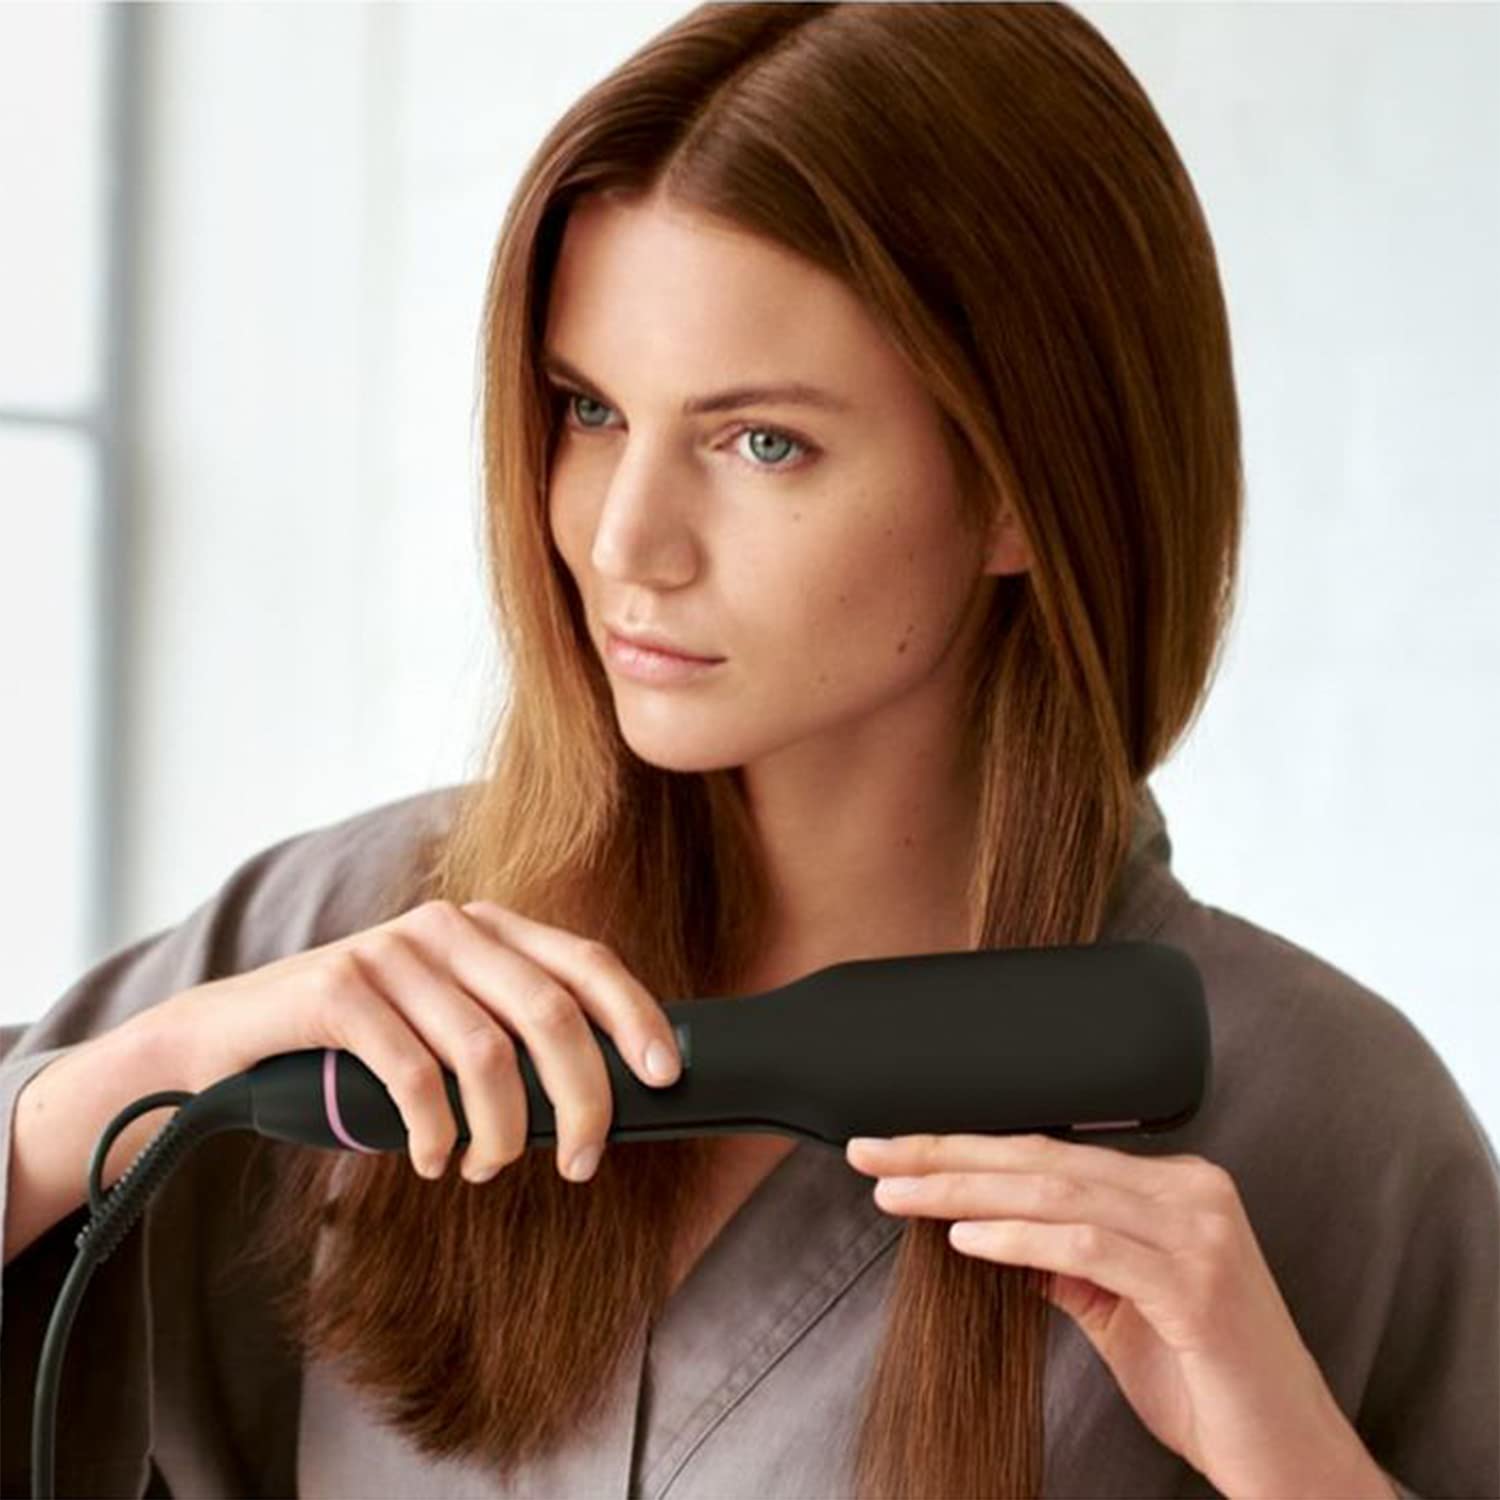 Philips Straight Care Vivid Ends Straightener in Bahrain - Halabh